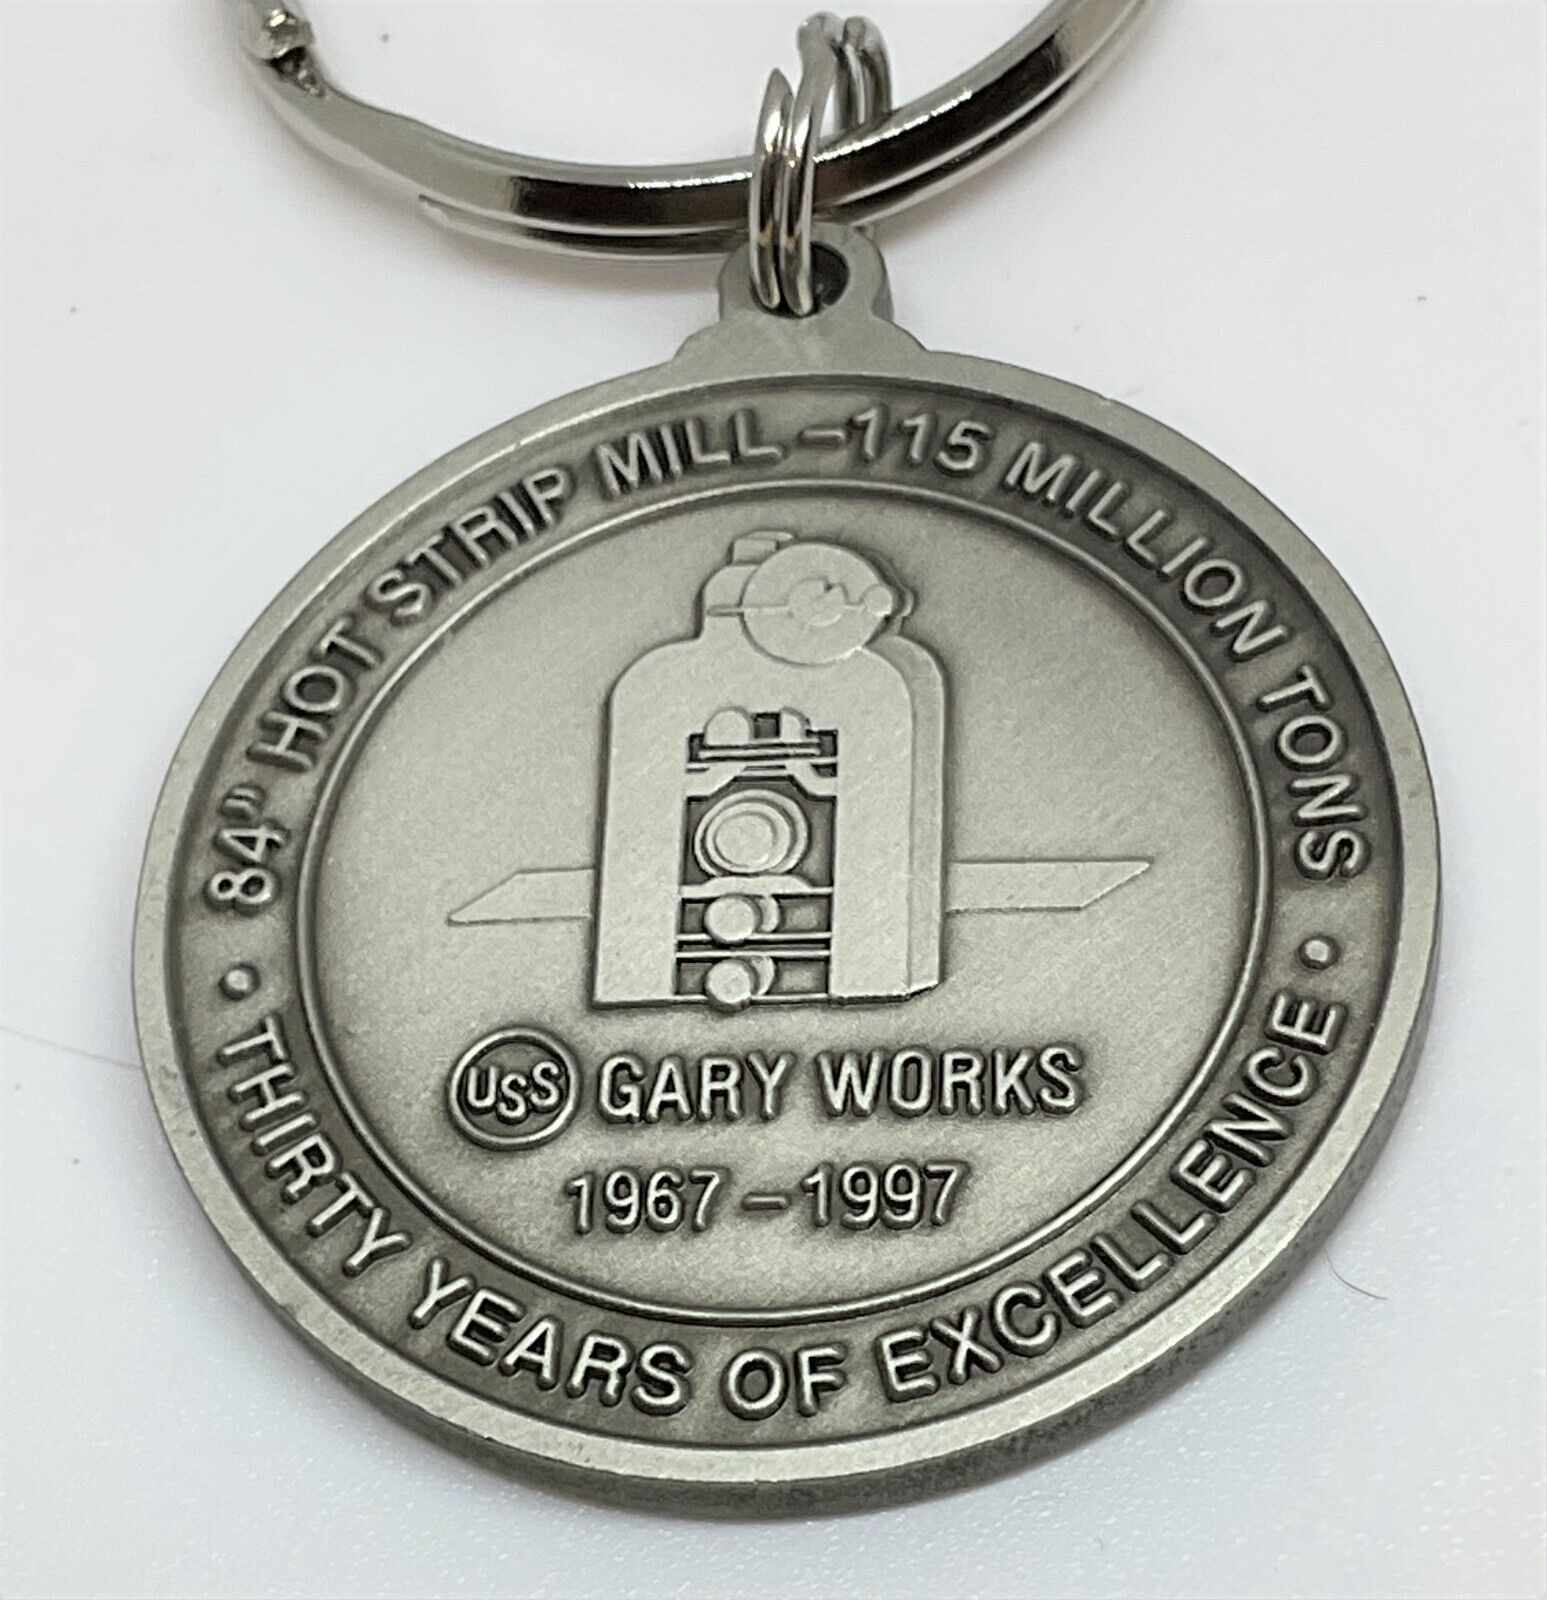 Rare - U S Steel, Gary Works Medal, # 1 Continuous Caster, 1967-1997